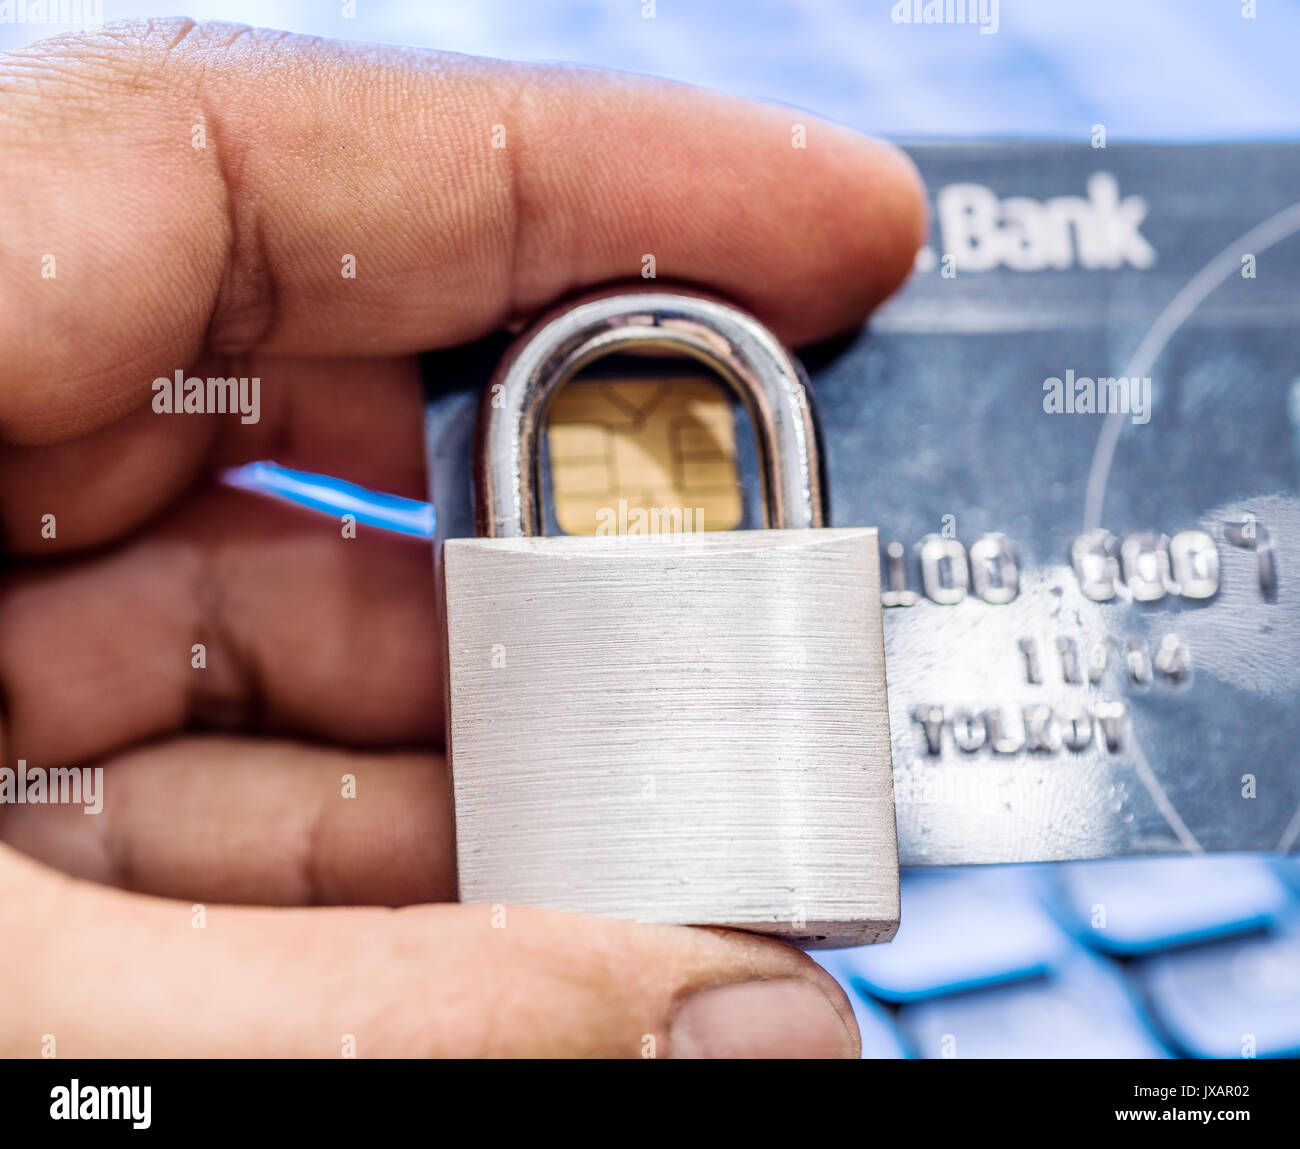 Credit cards and simle mechanical lock. Security concept. Stock Photo